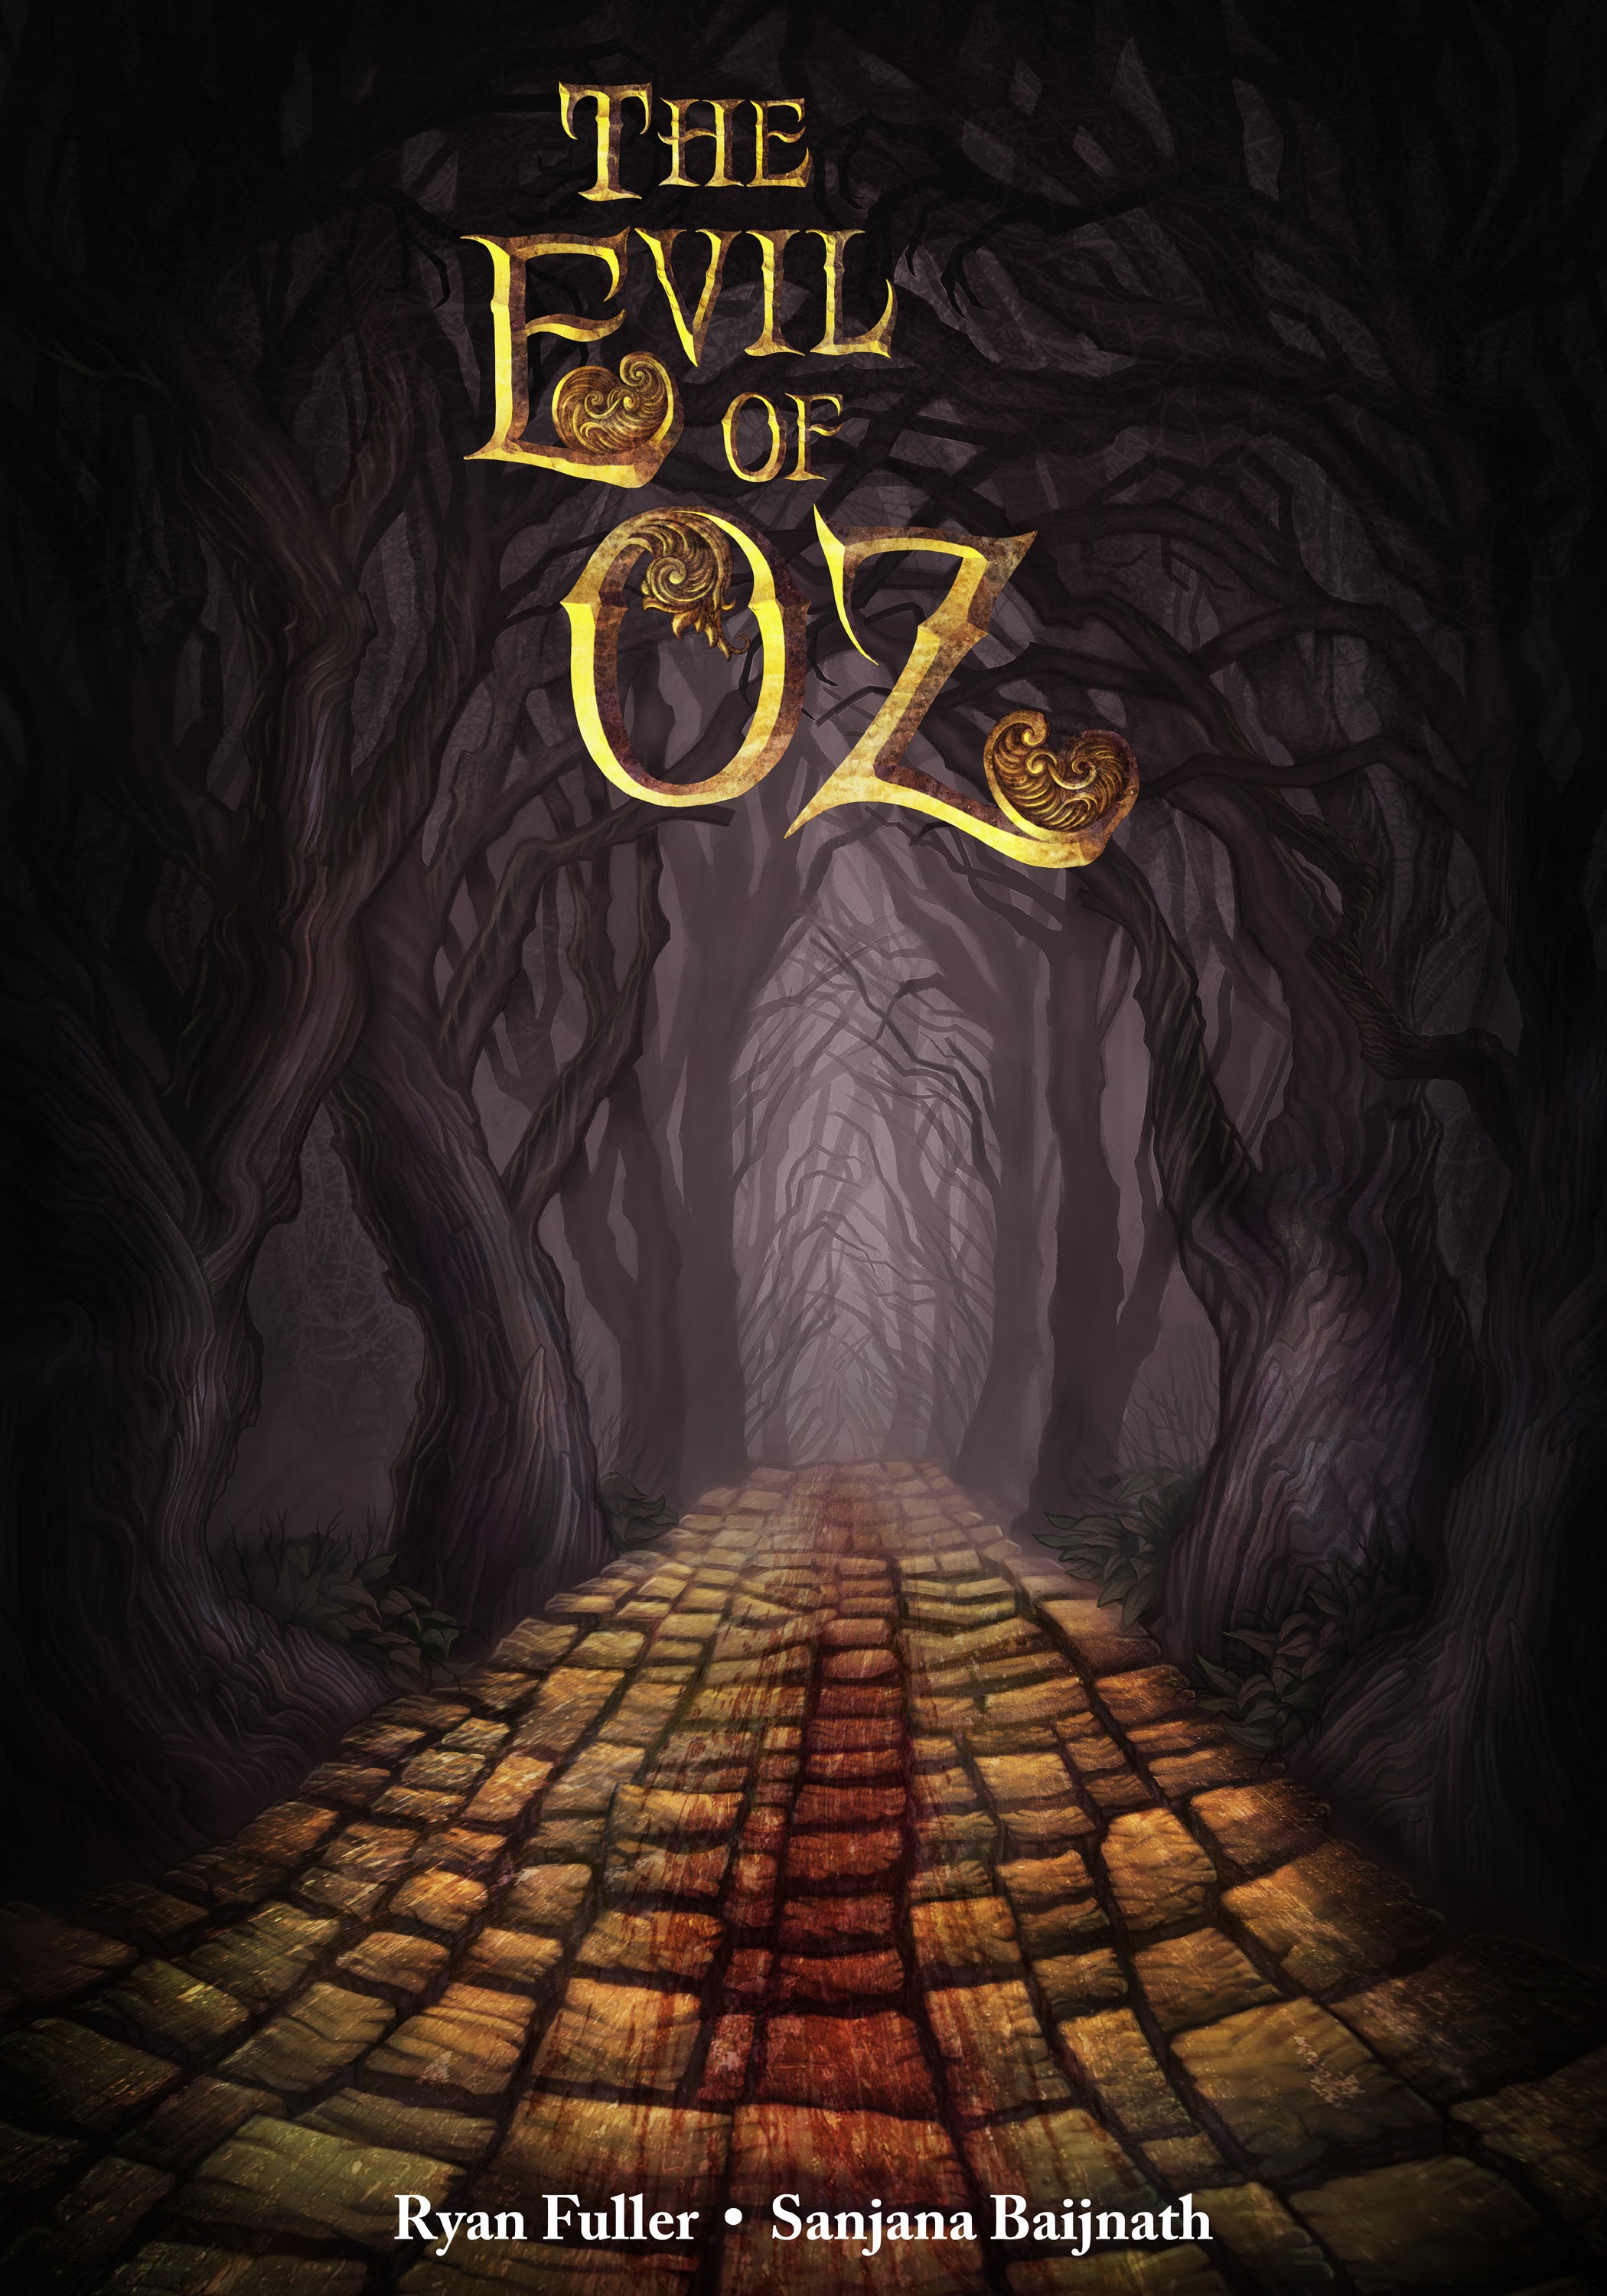 Read online The Evil of Oz comic -  Issue # TPB - 1